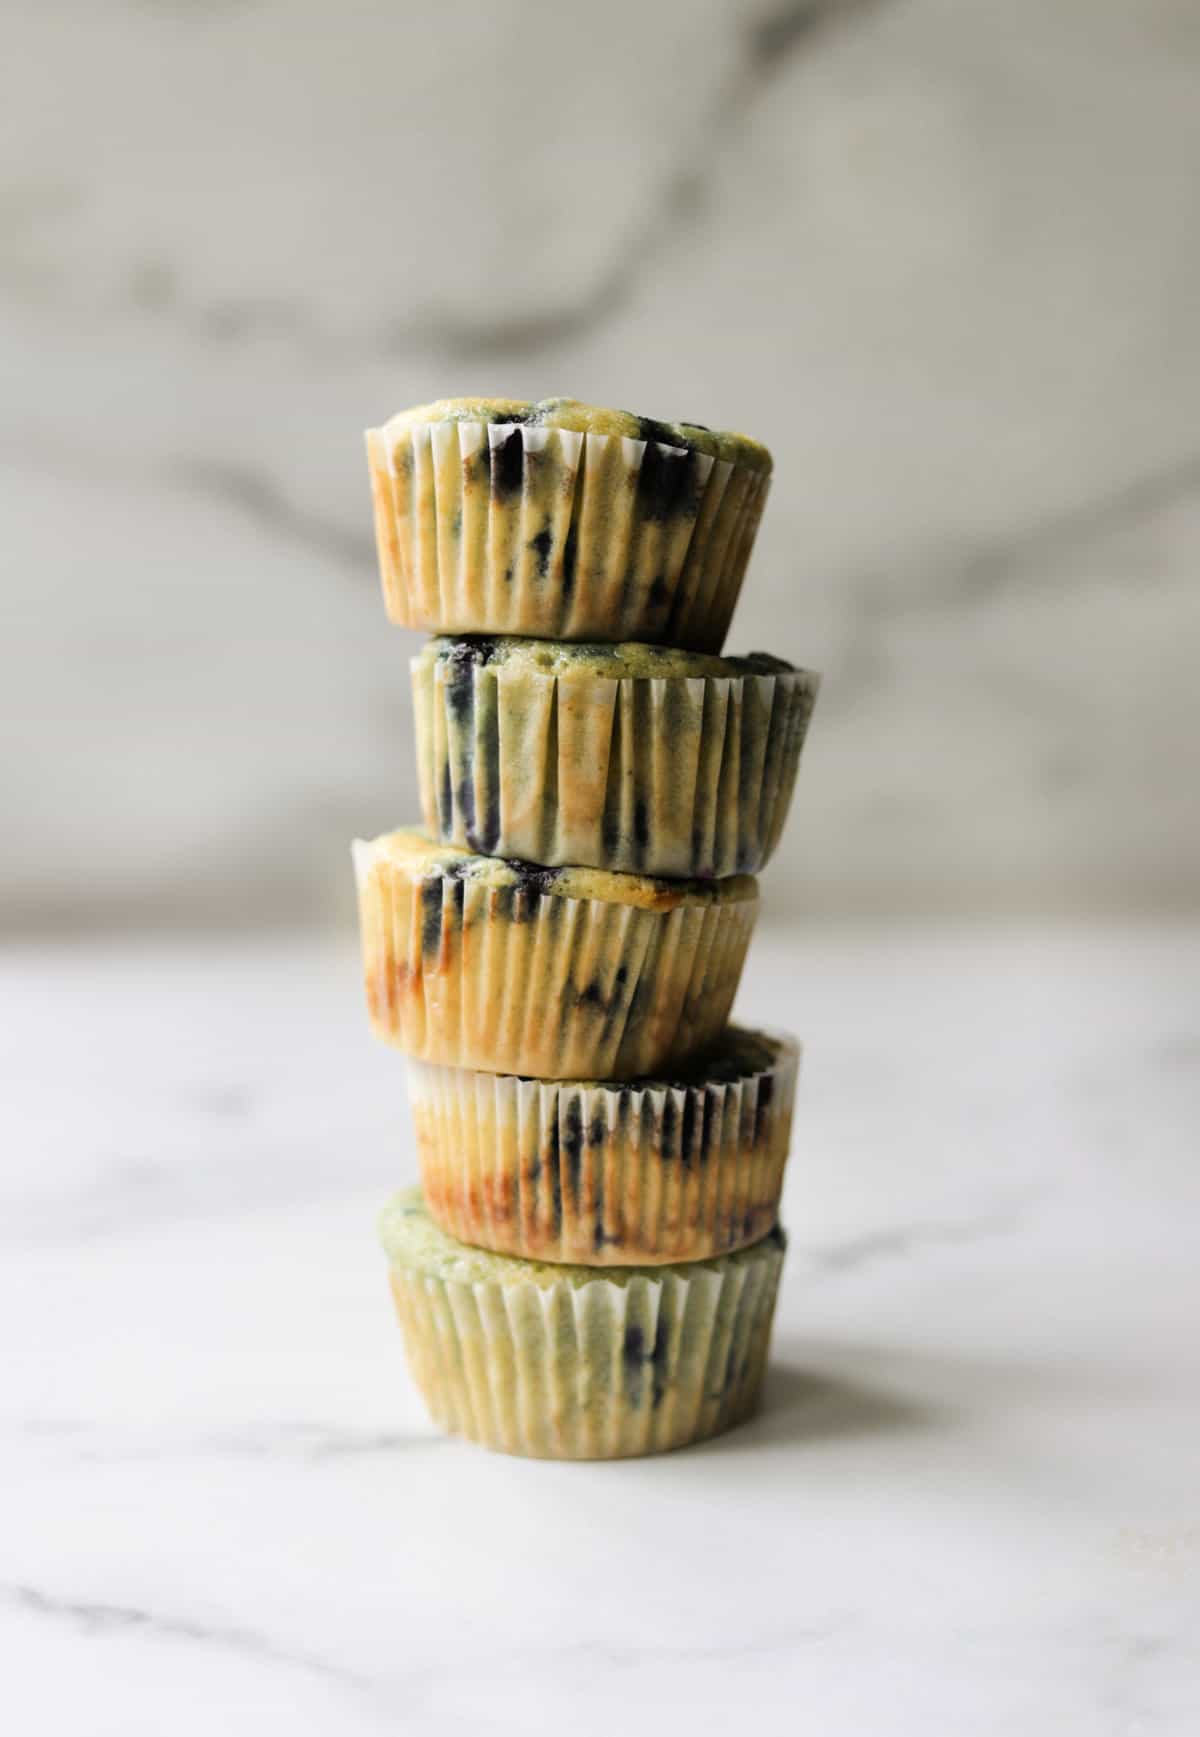 A front shot of a stack of 5 blueberry muffins.